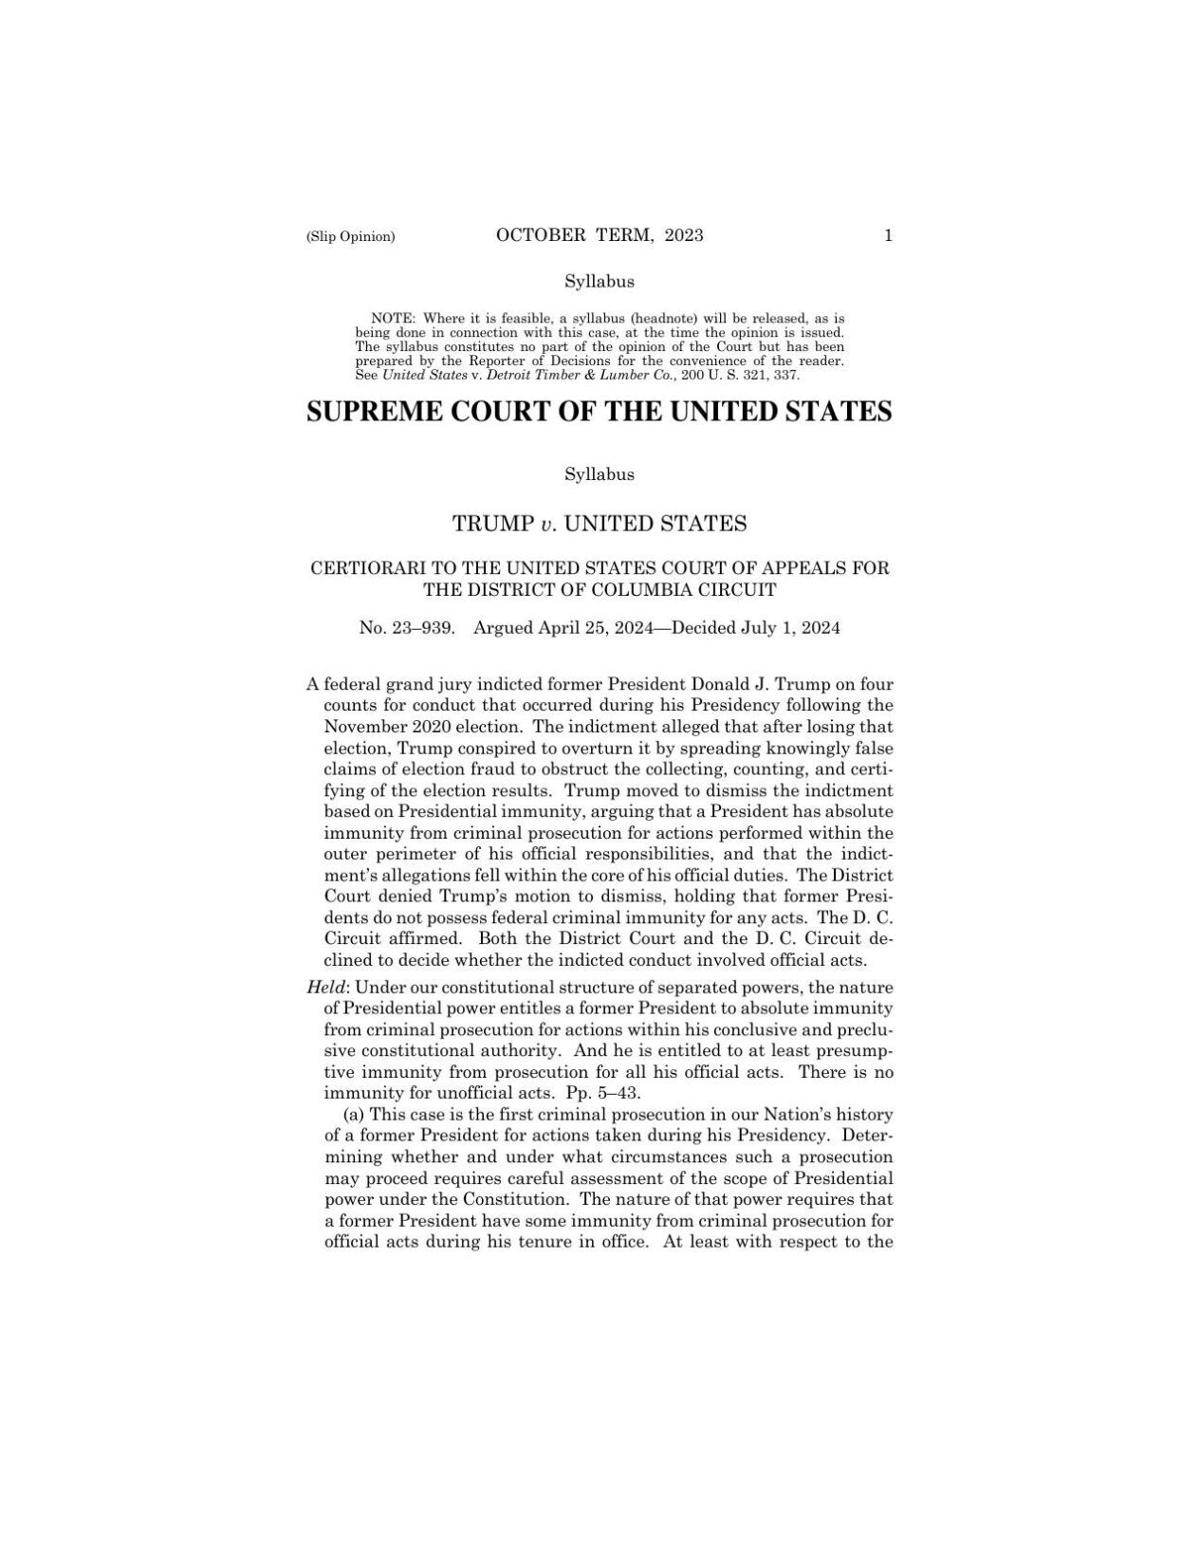 Read the Supreme Court ruling on presidential immunity